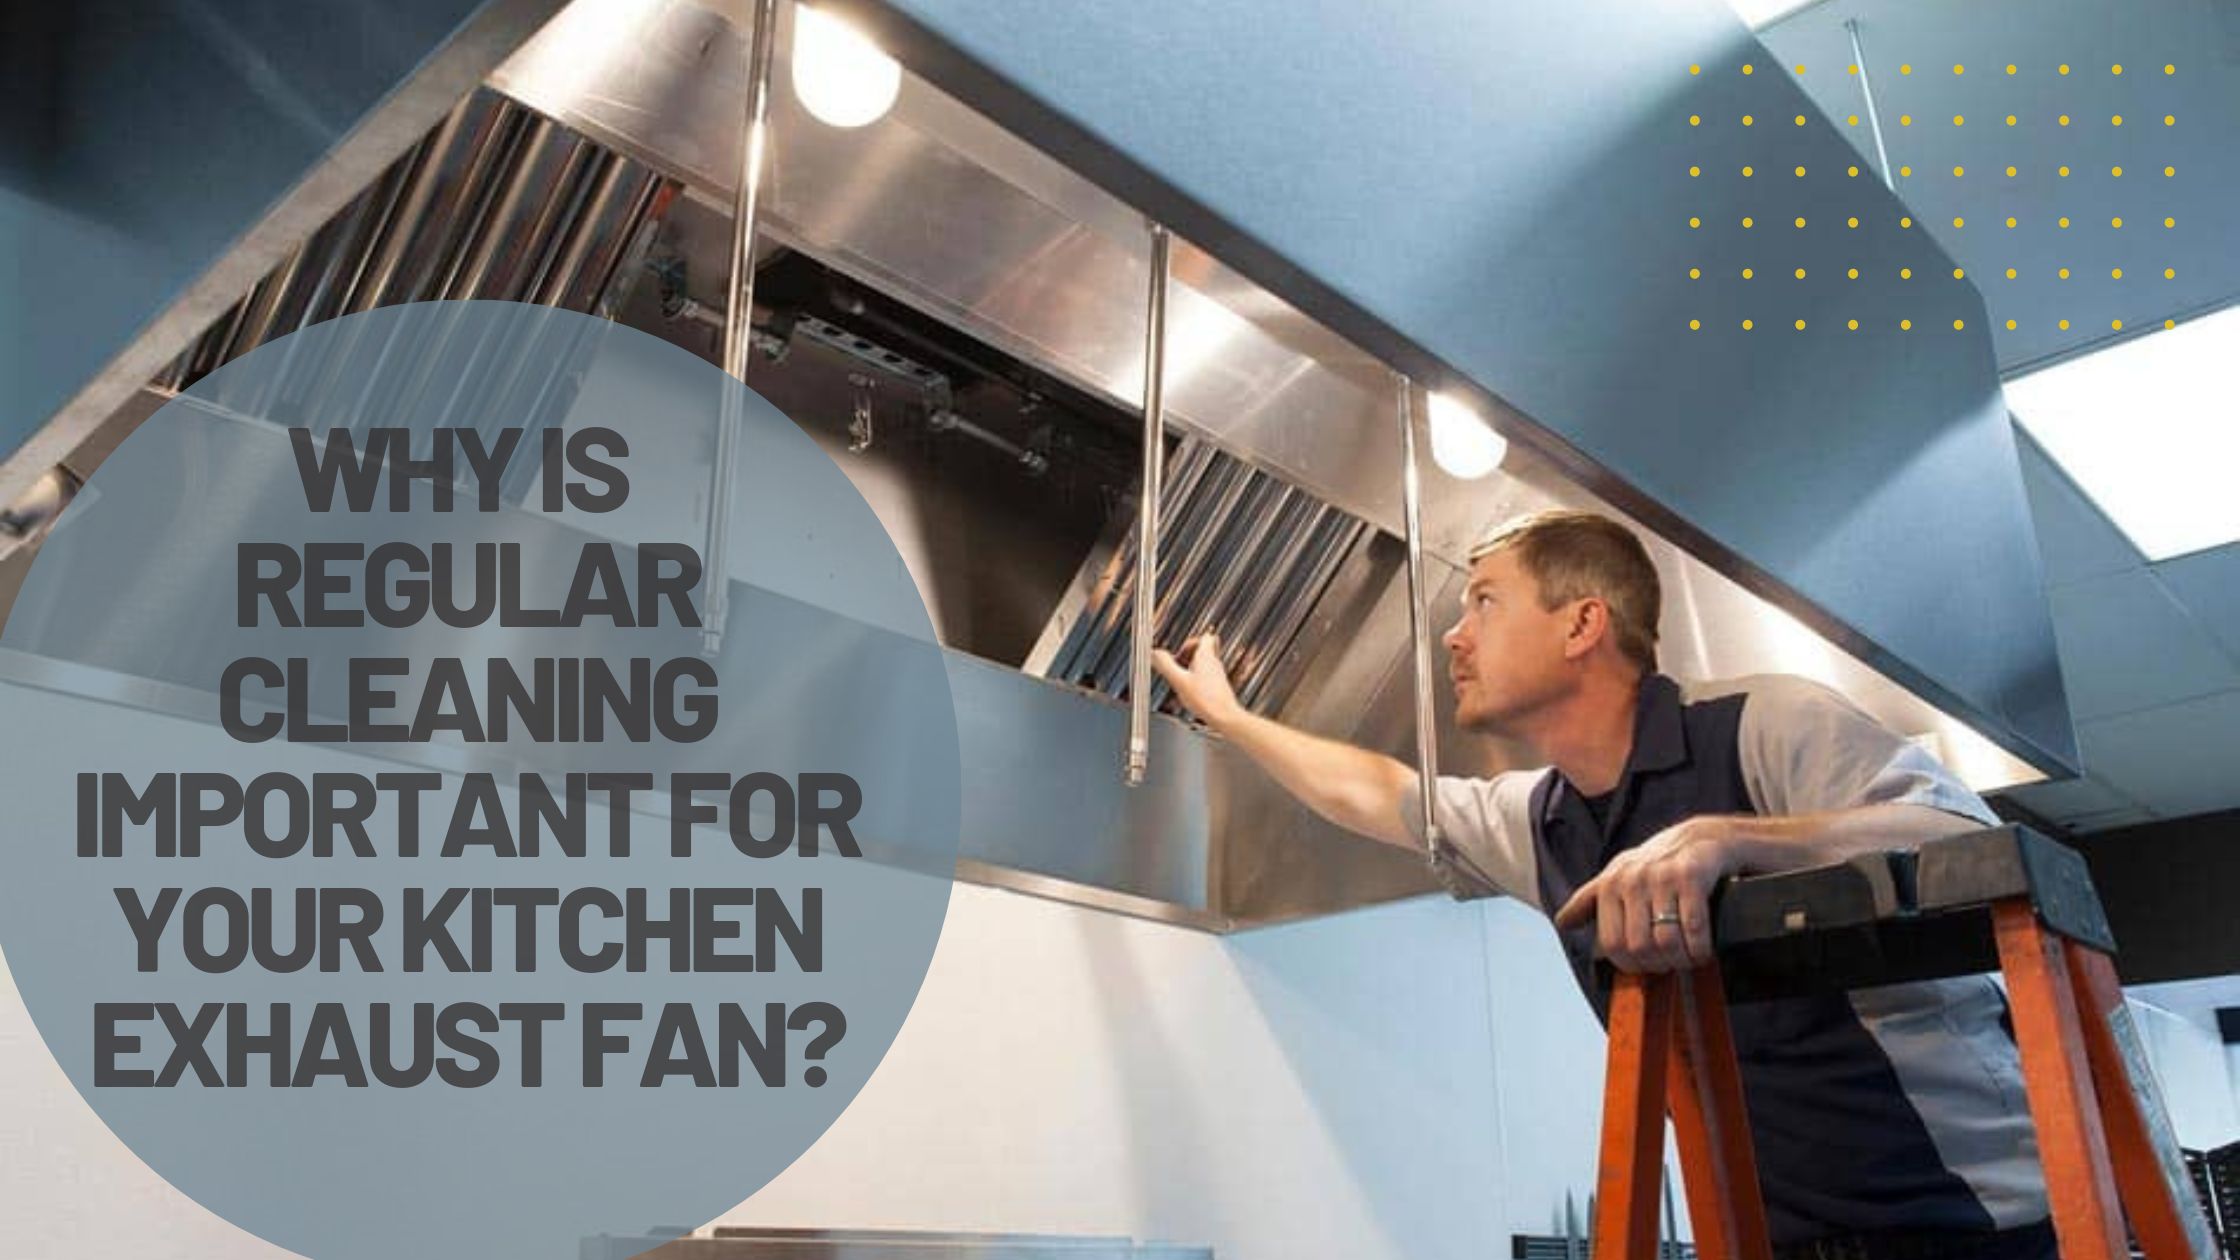 Why is Regular Cleaning Important for Your Kitchen Exhaust Fan?